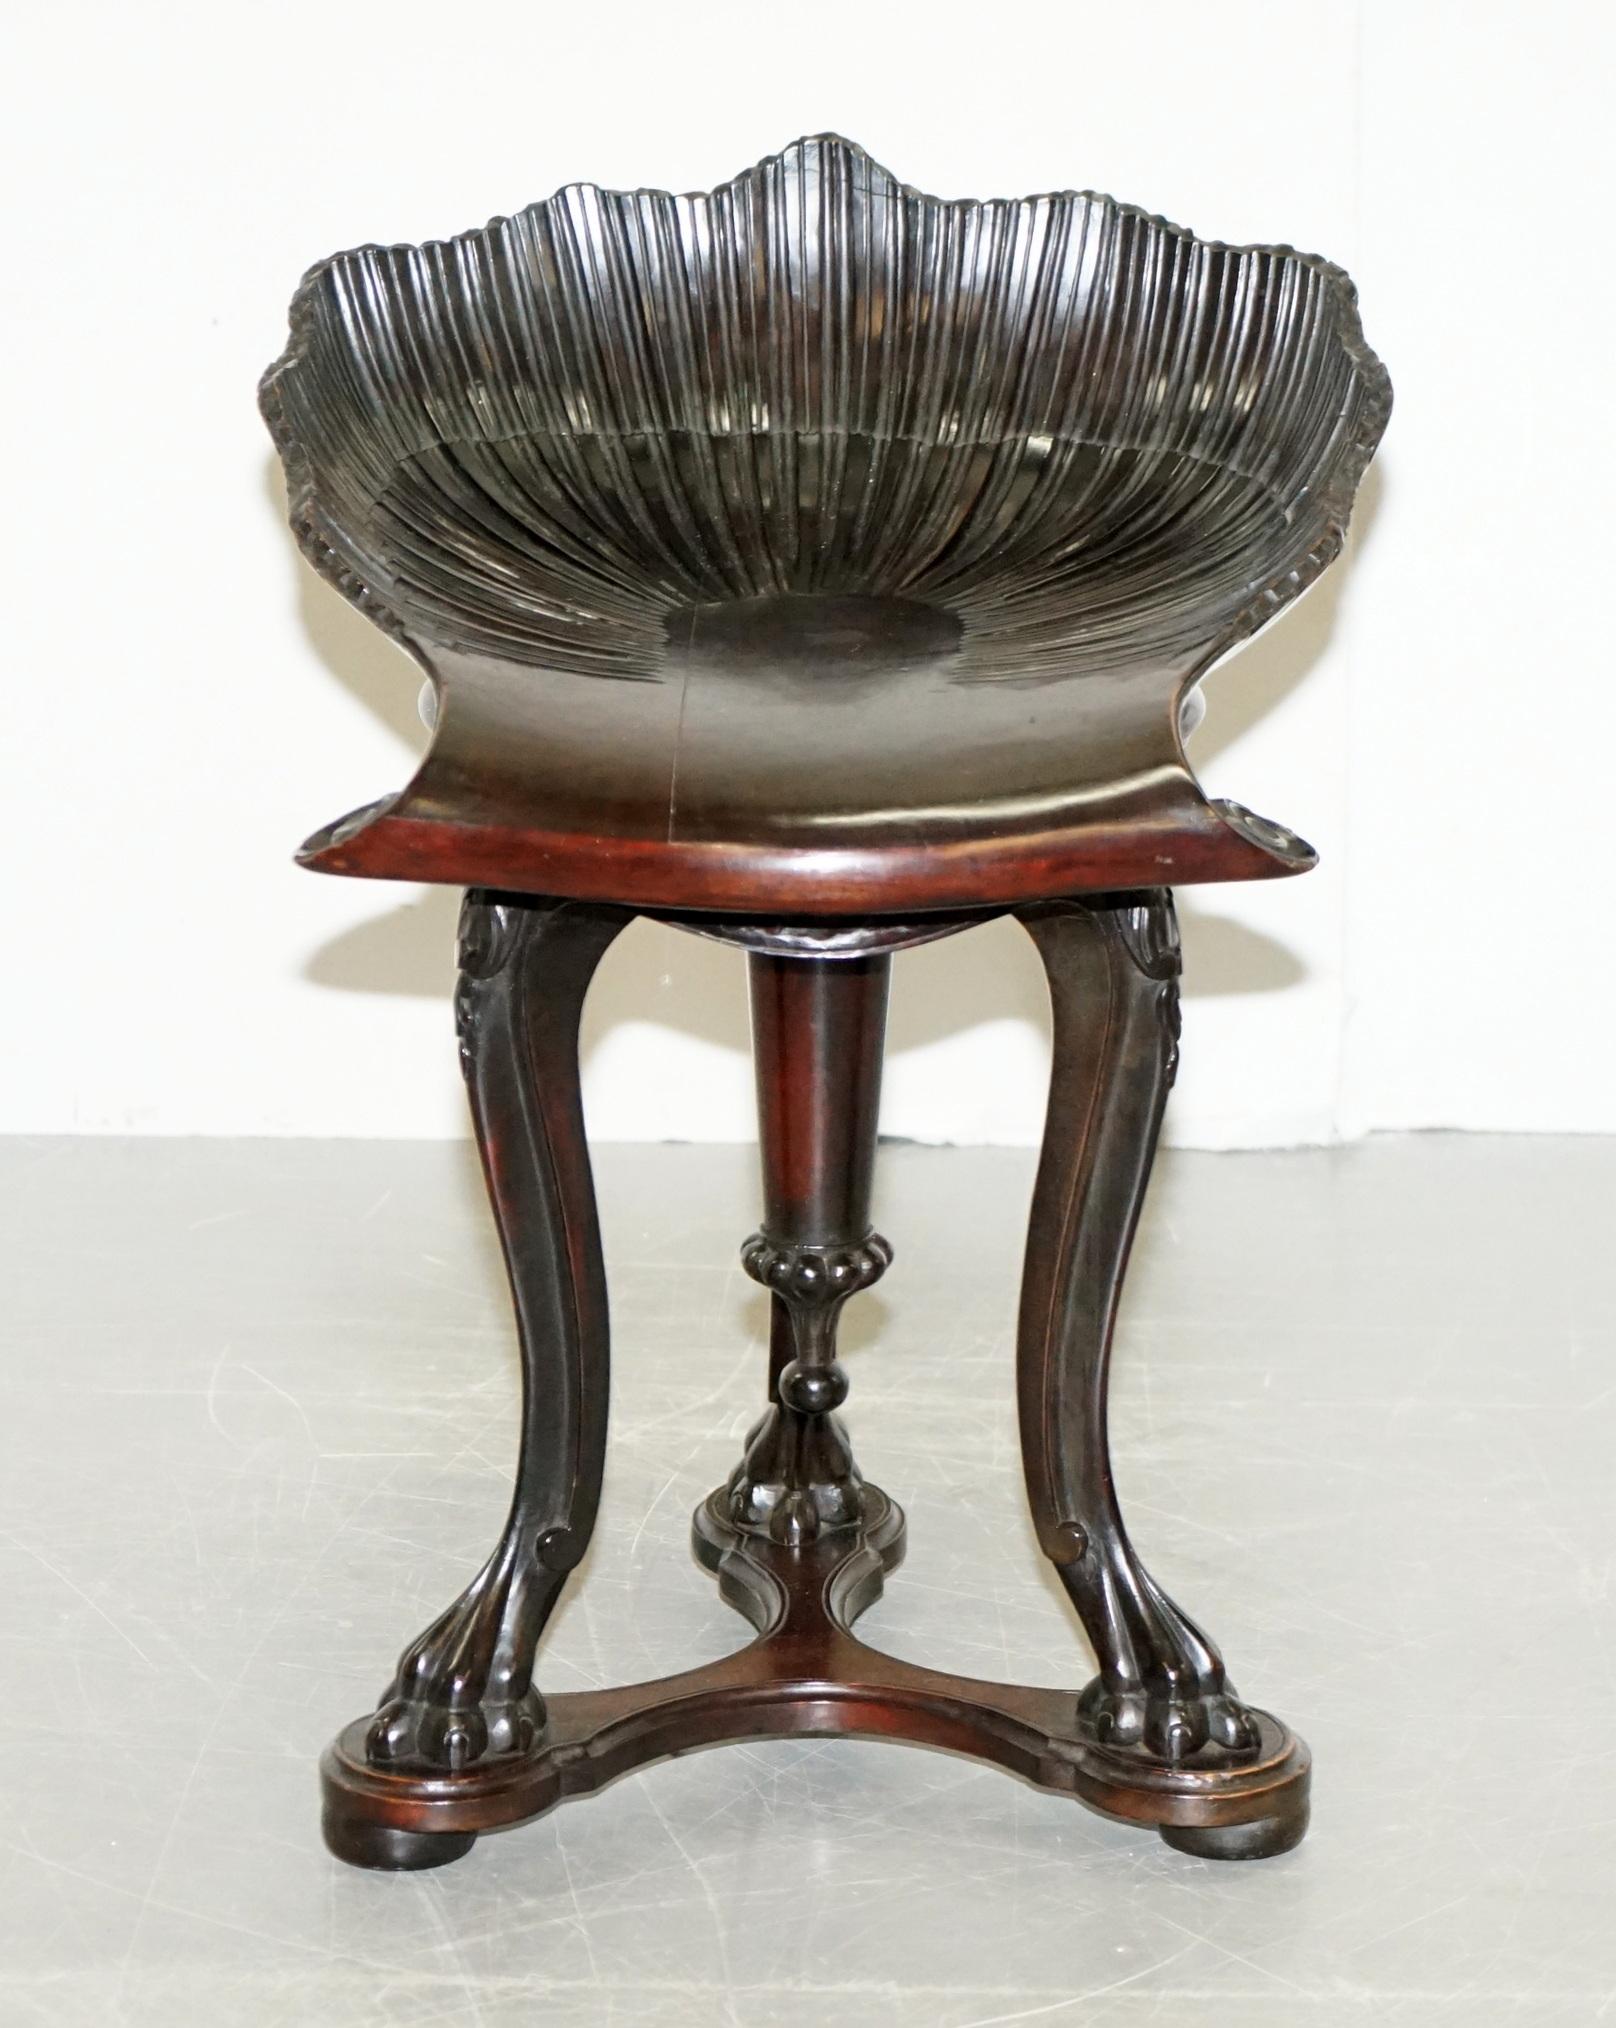 We are delighted to offer for sale this exceptionally rare original 19th century circa 1880 Italian Venetian height adjustable Grotto Fantasy stool after the genius that is CIE Pauly

What a piece, it is absolutely amazing, this has to be one of